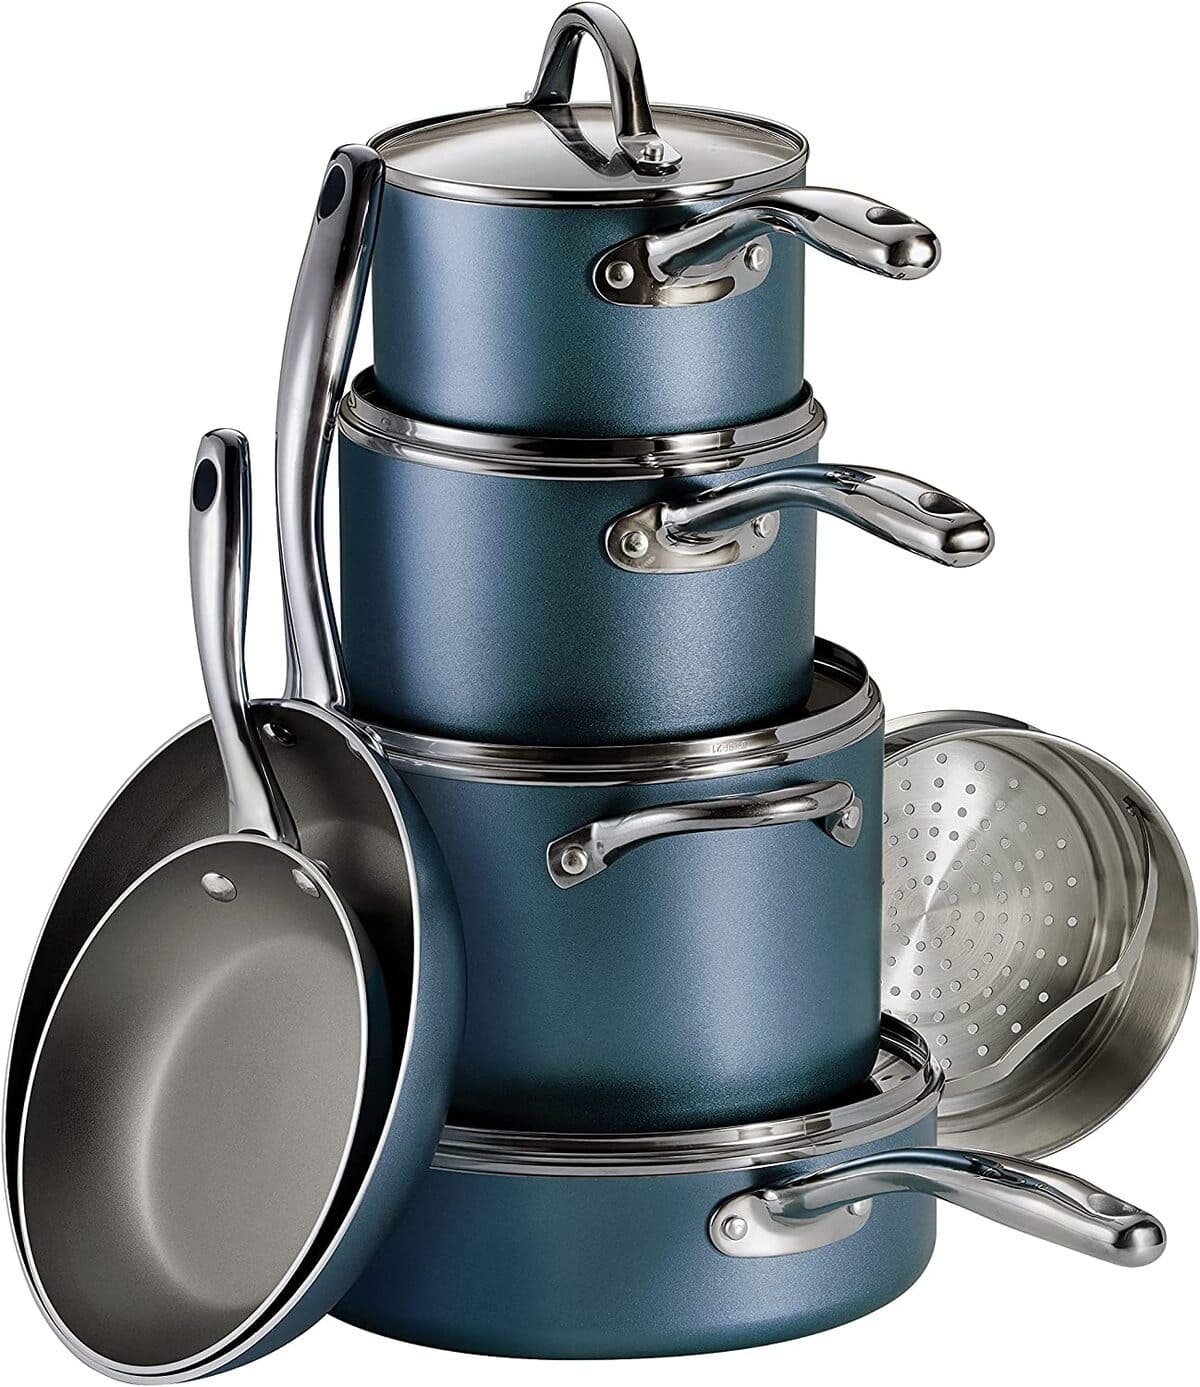 Where Is Tramontina Cookware Made